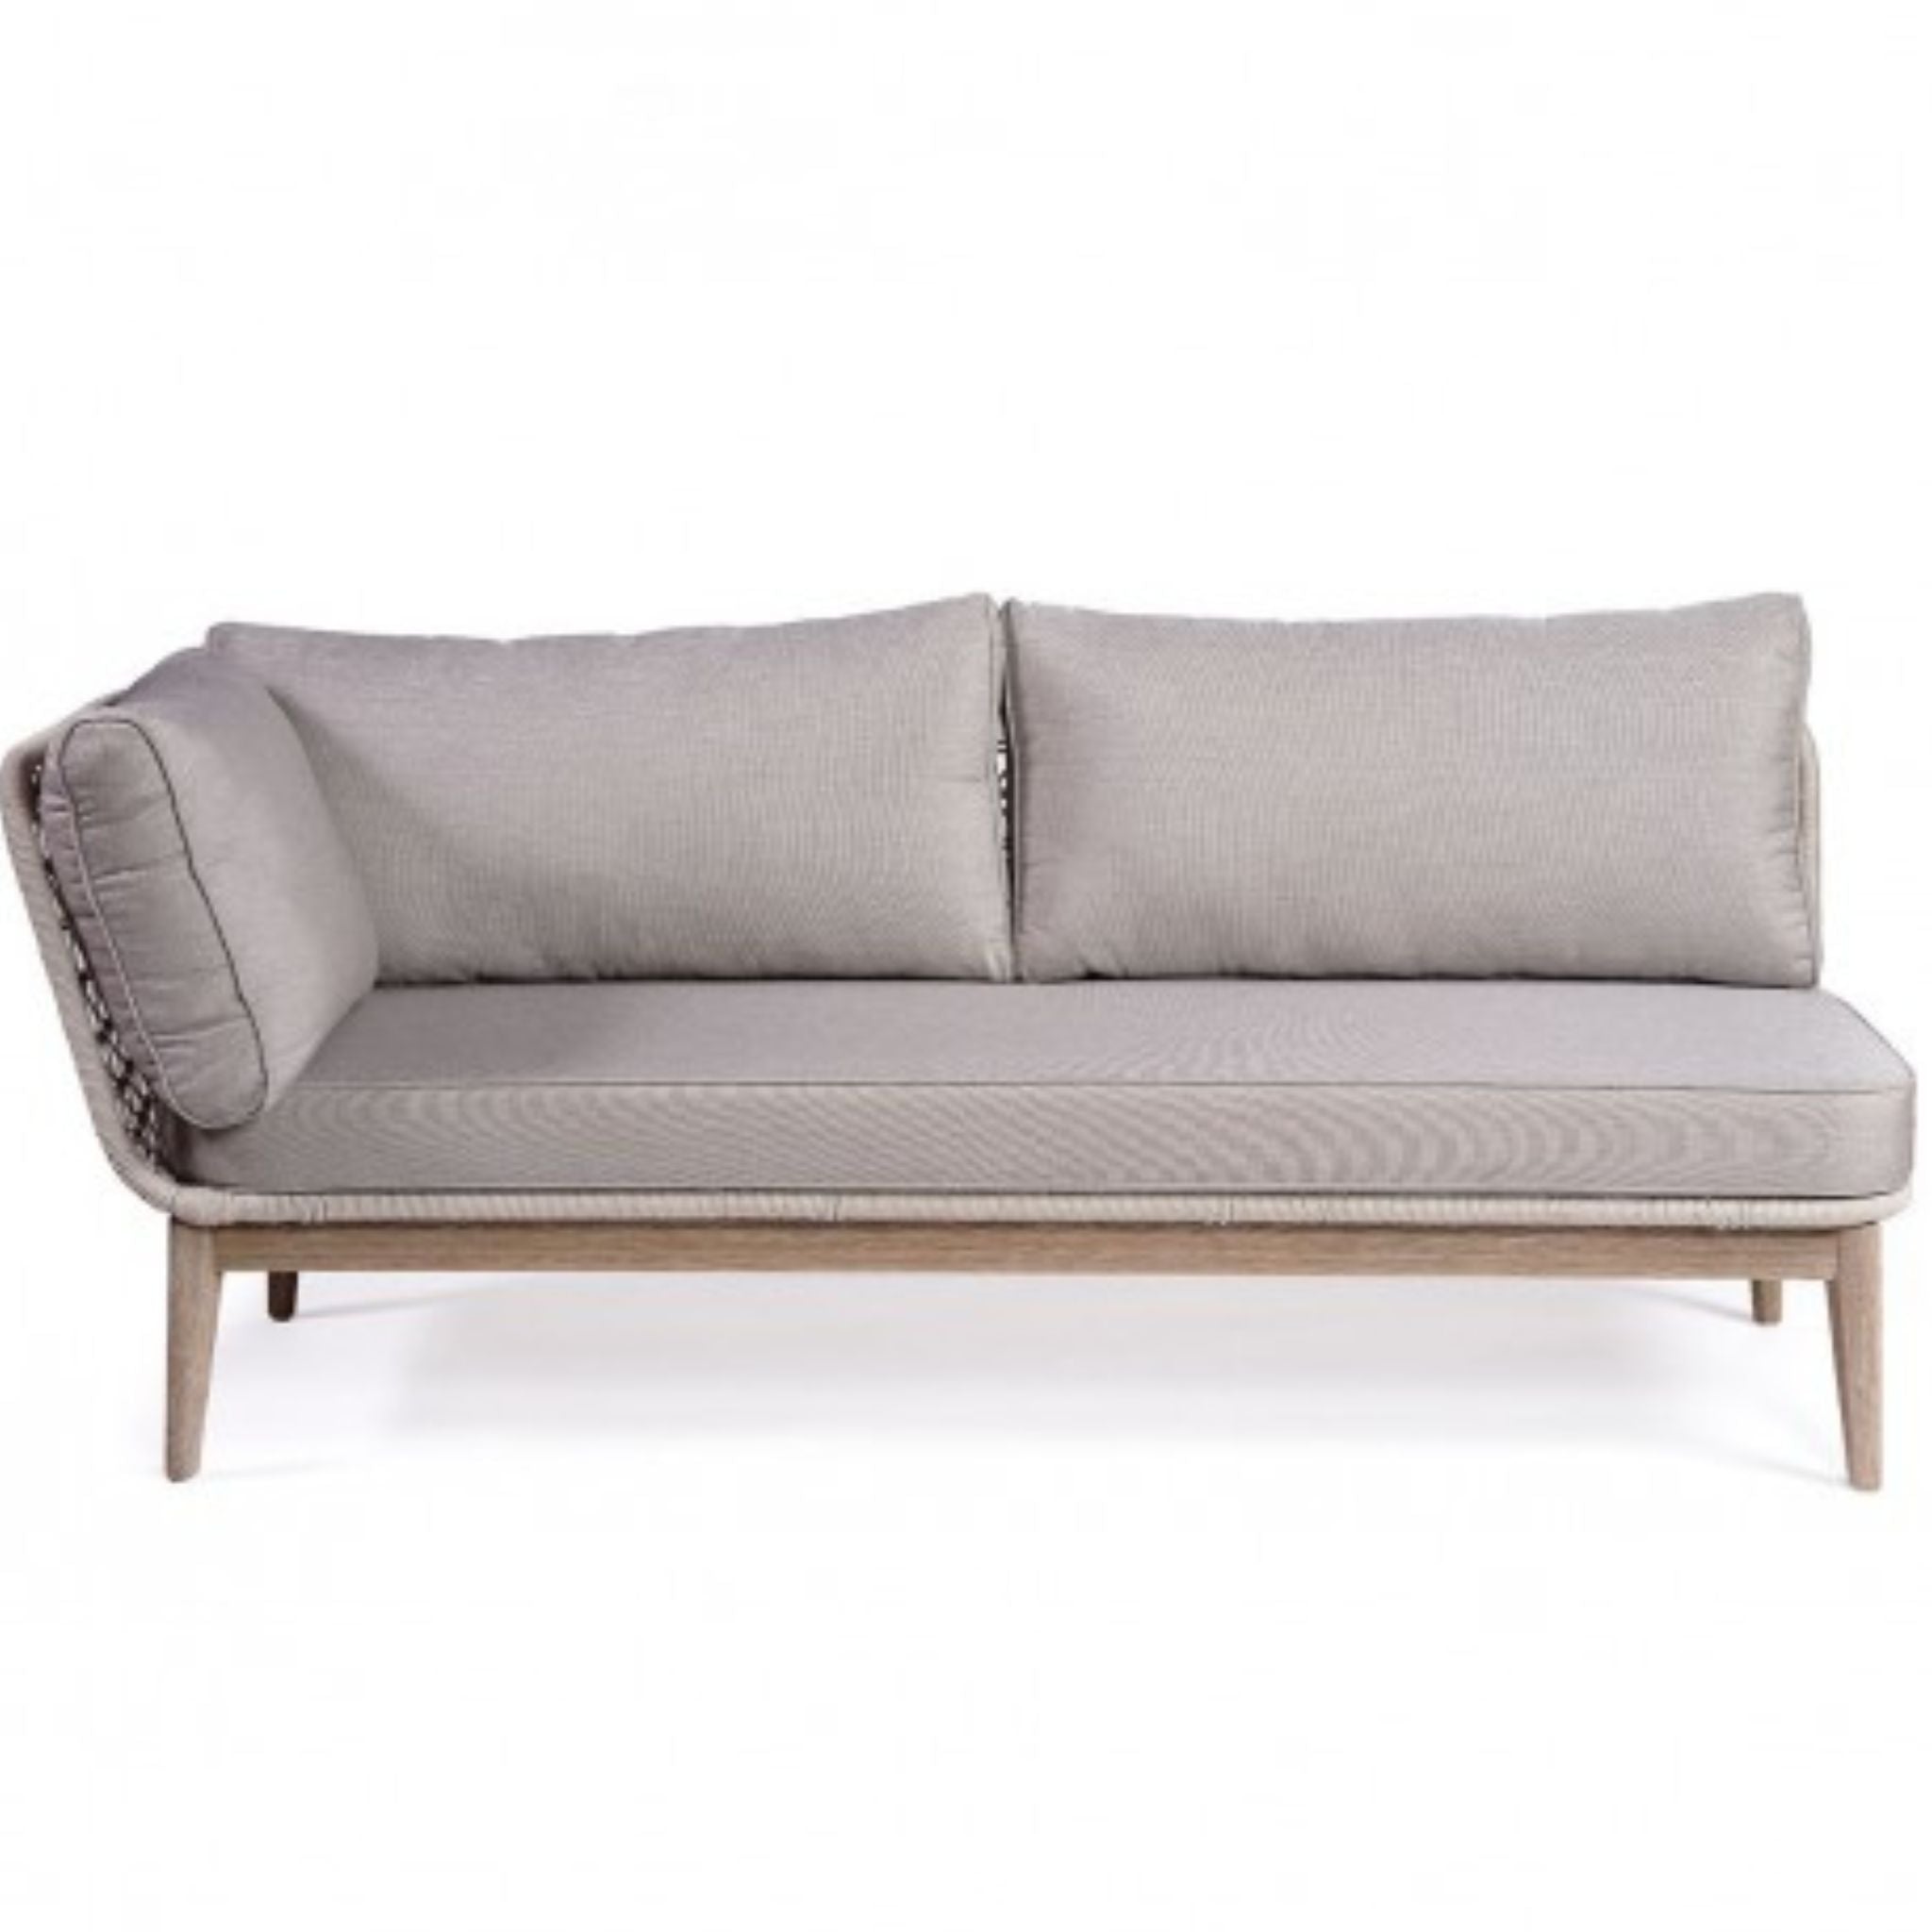 Crisal Decoracion Osana-2 Outdoor Sofa with One Arm Wood and Greyish White Rope - ModernistaLiving